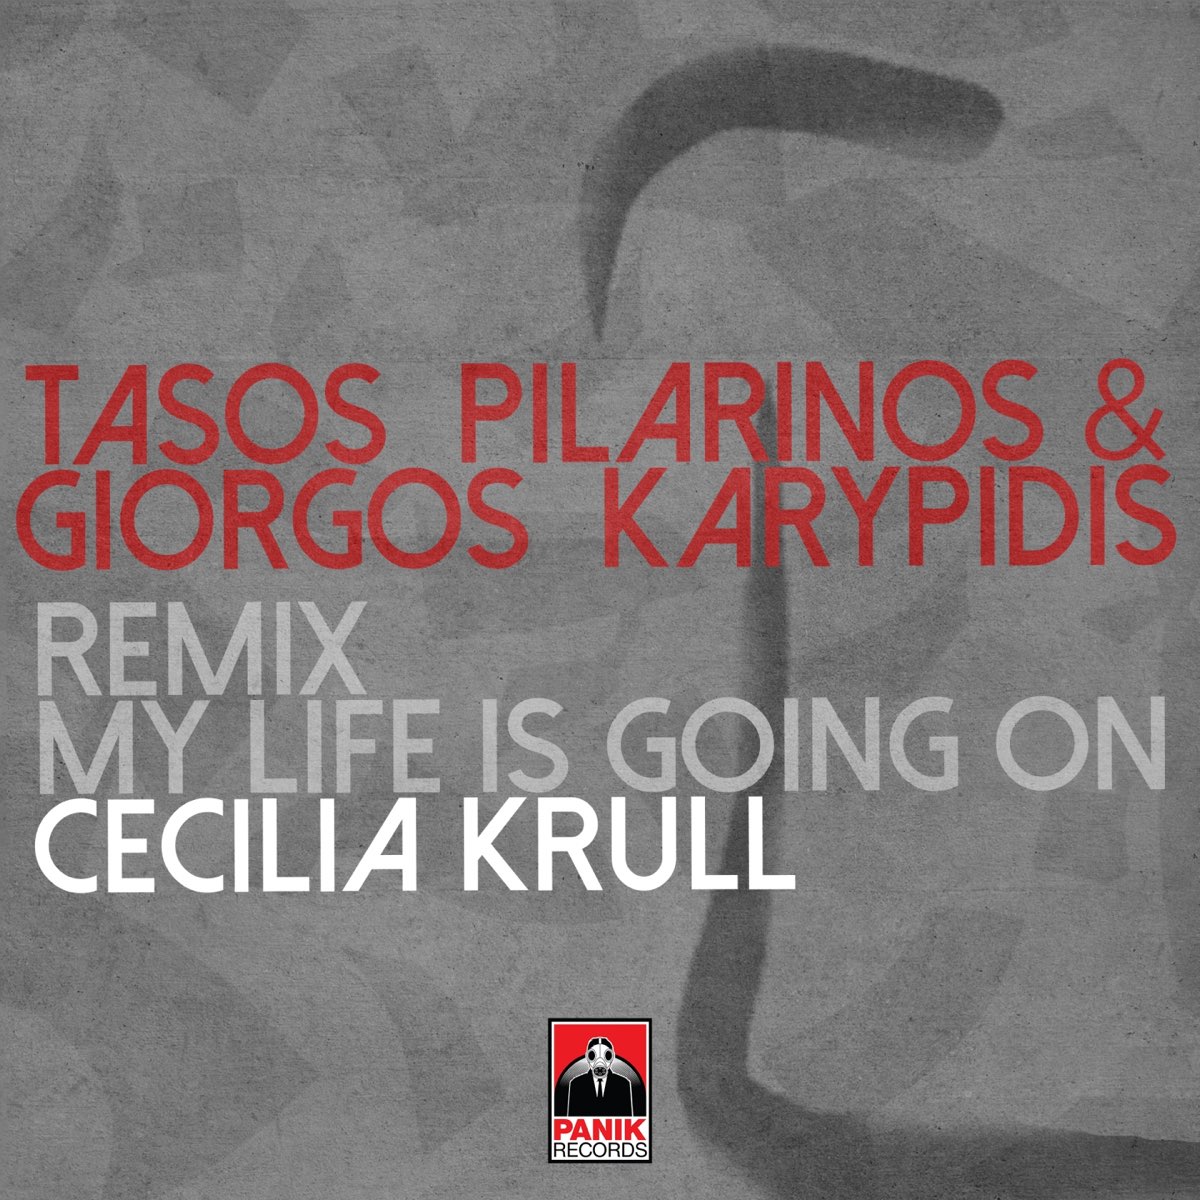 Cecilia krull my life is. My Life is going on Cecilia Krull. My Life is going on - Cecilia Krull Ноты. My Life is going on from la casa de papel Cecilia Krull перевод. Burak Yeter & Cecilia Krull - my Life is going on.